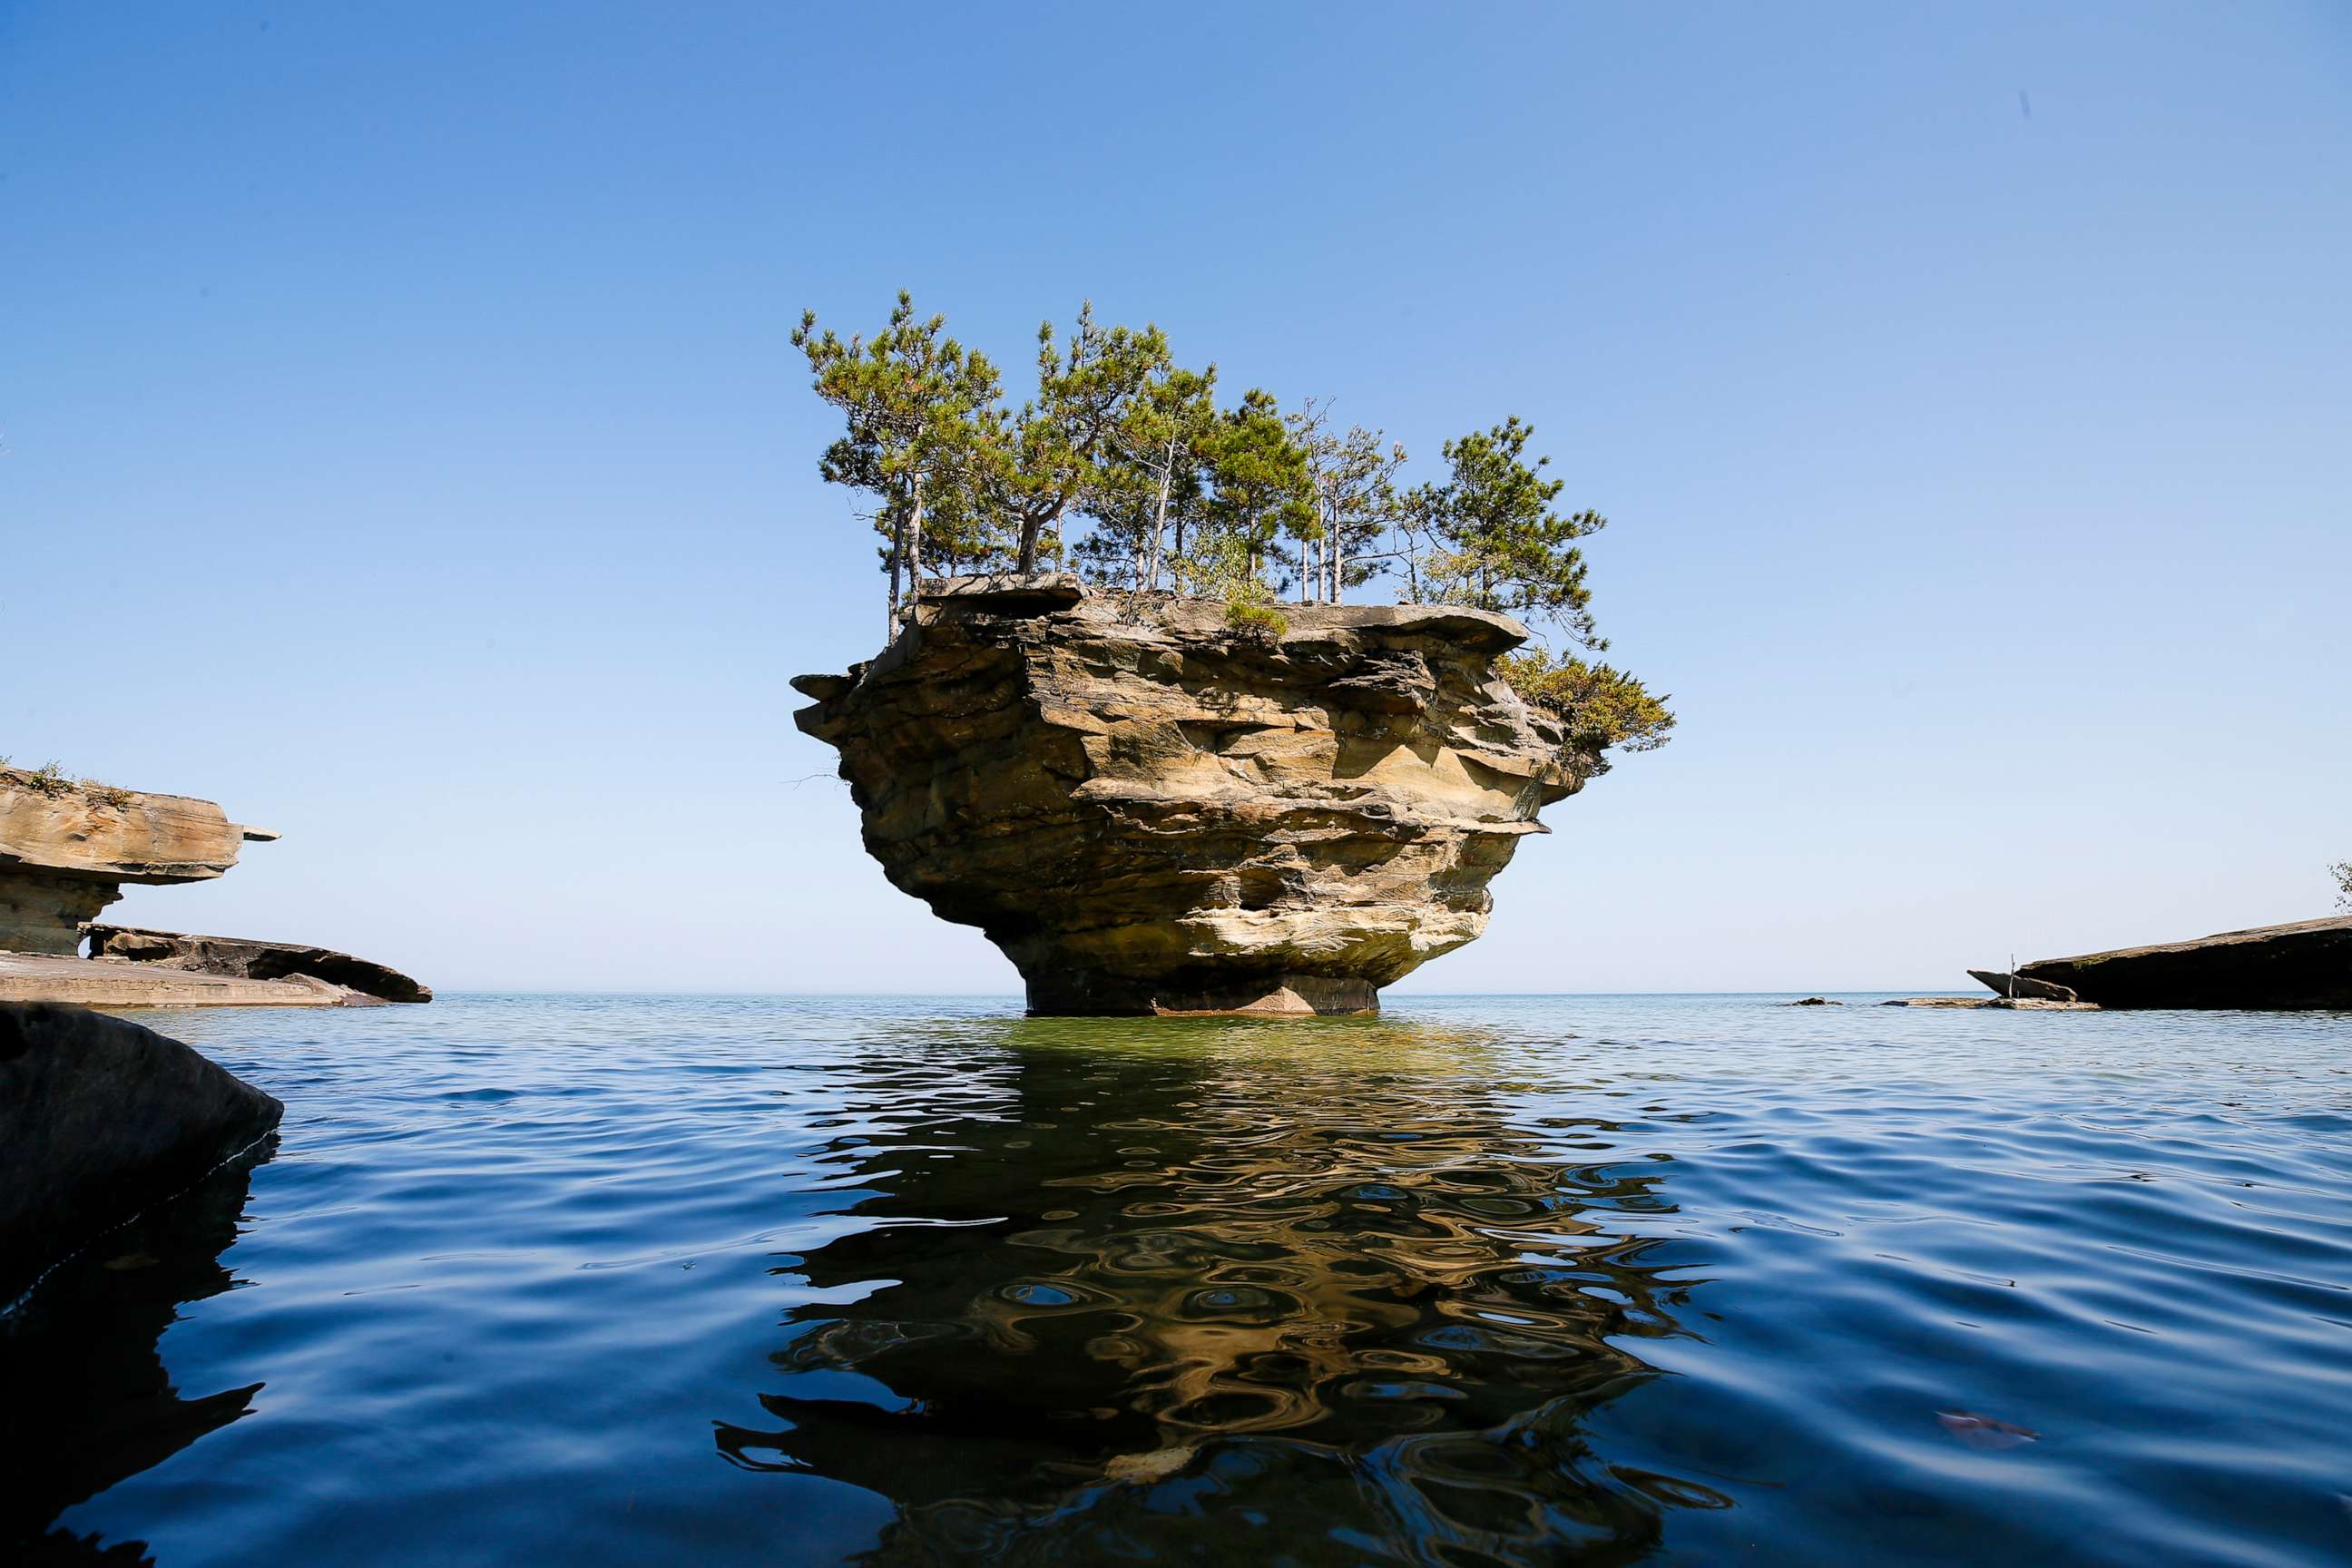 PHOTO: Turnip rock, a geological rock formation stands in Lake Huron near Port Austin, Mich.